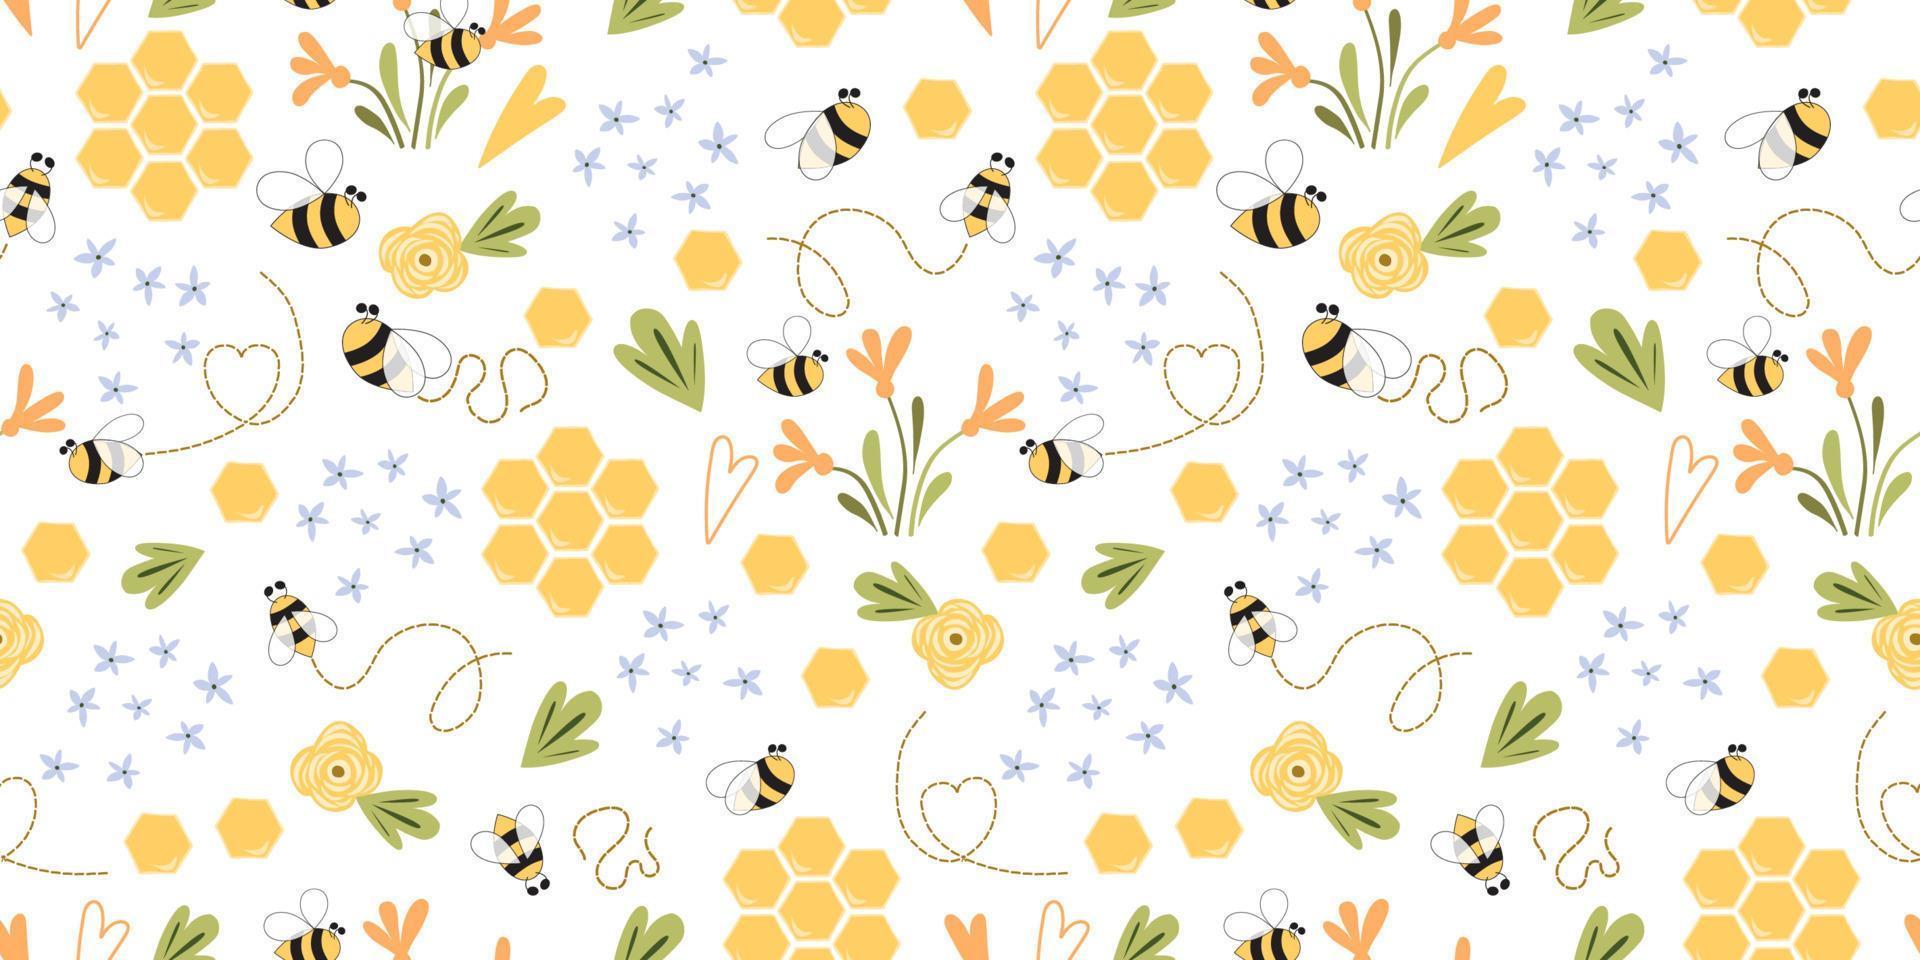 Bee honey pattern Bee seamless pattern Cute hand drawn summer meadow flowers, bee honeycombe background Hand drawn honey templates. Kids fabric design. Summer illustration. Floral sweet bees print. vector